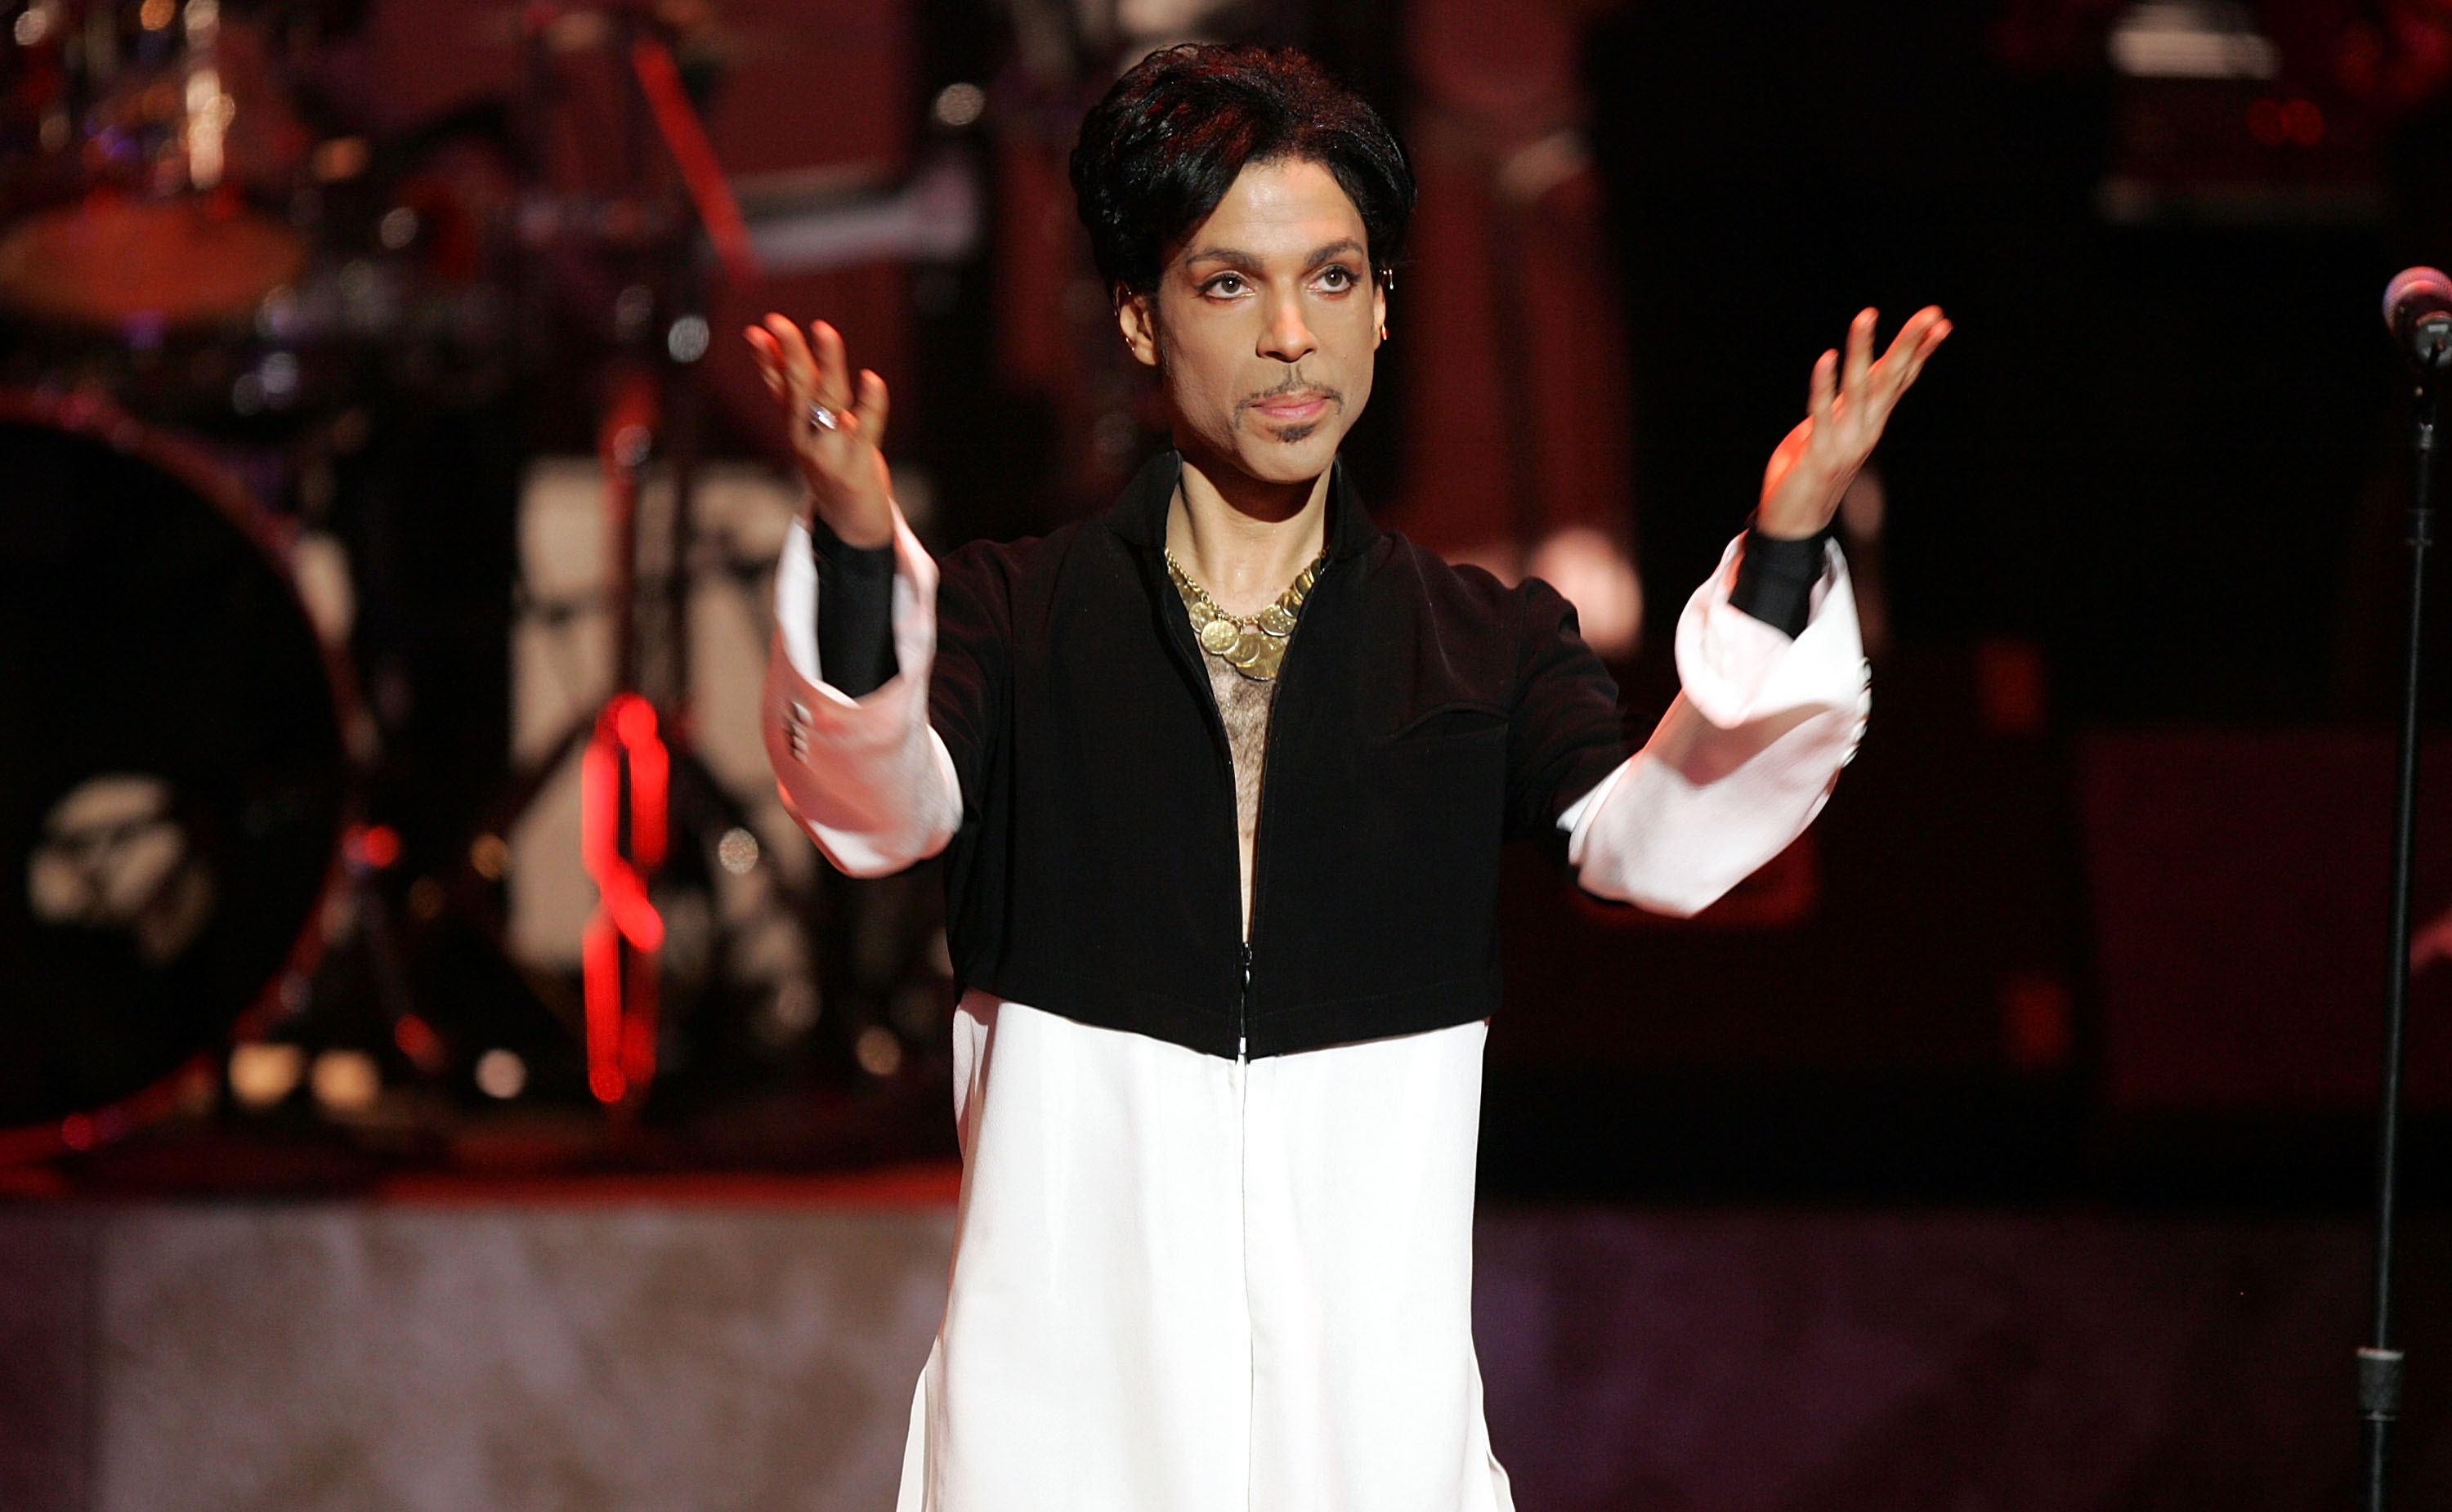 Prince honored with the Vanguard Award at the 36th NAACP Image Awards on March 19, 2005 in Los Angeles, California | Source: Getty Images